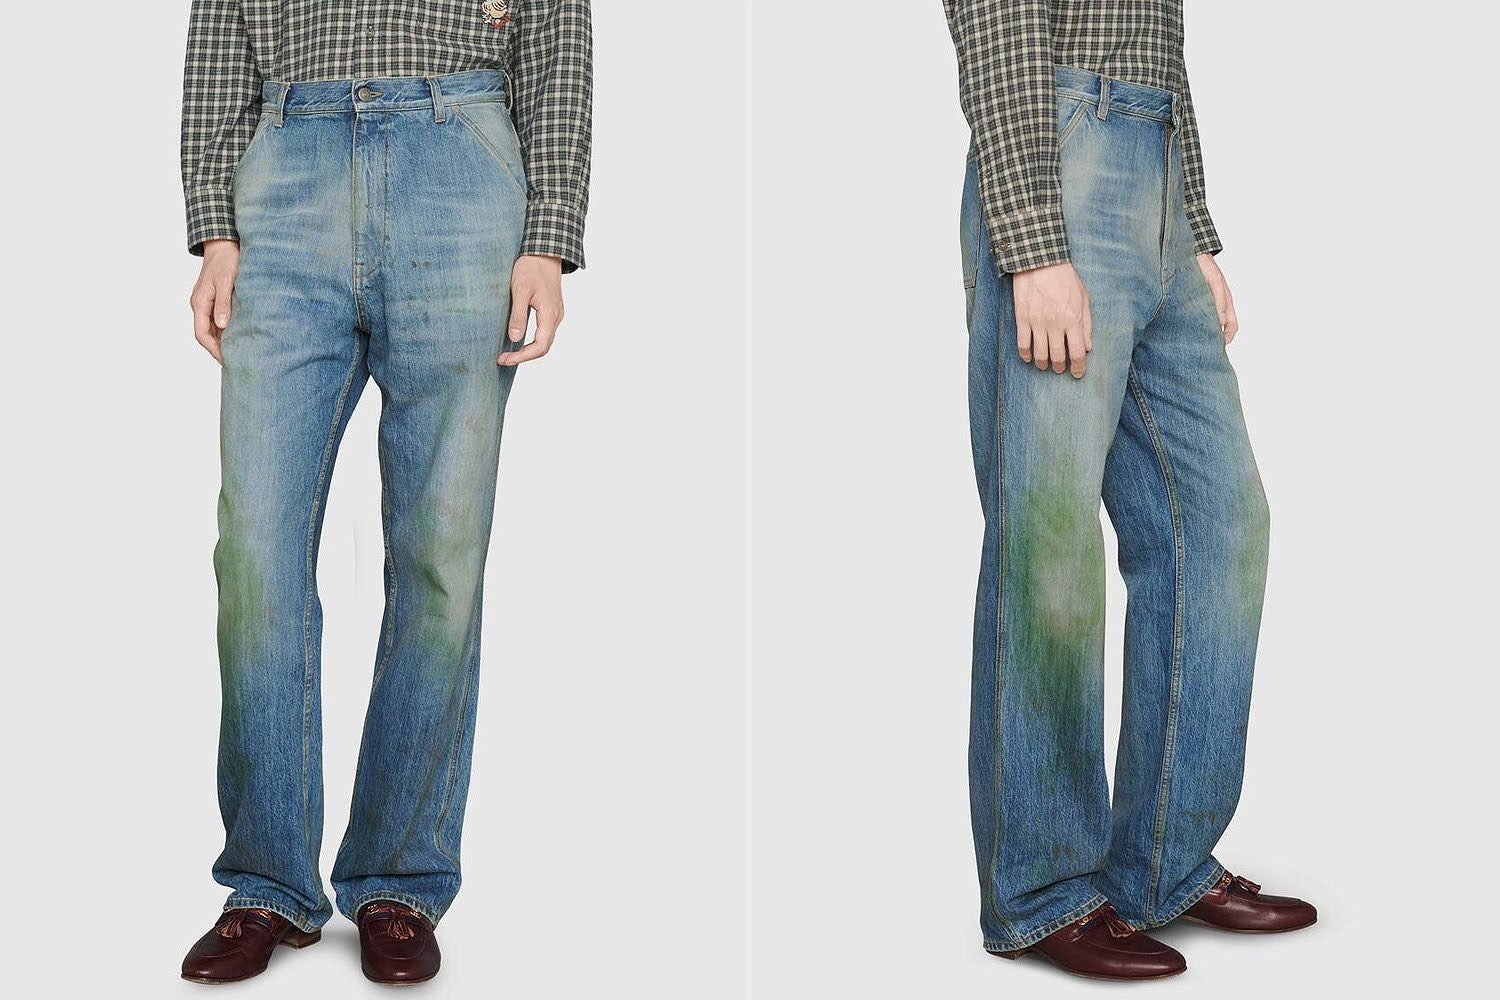 Gucci brings eco friendly jeans at high cost